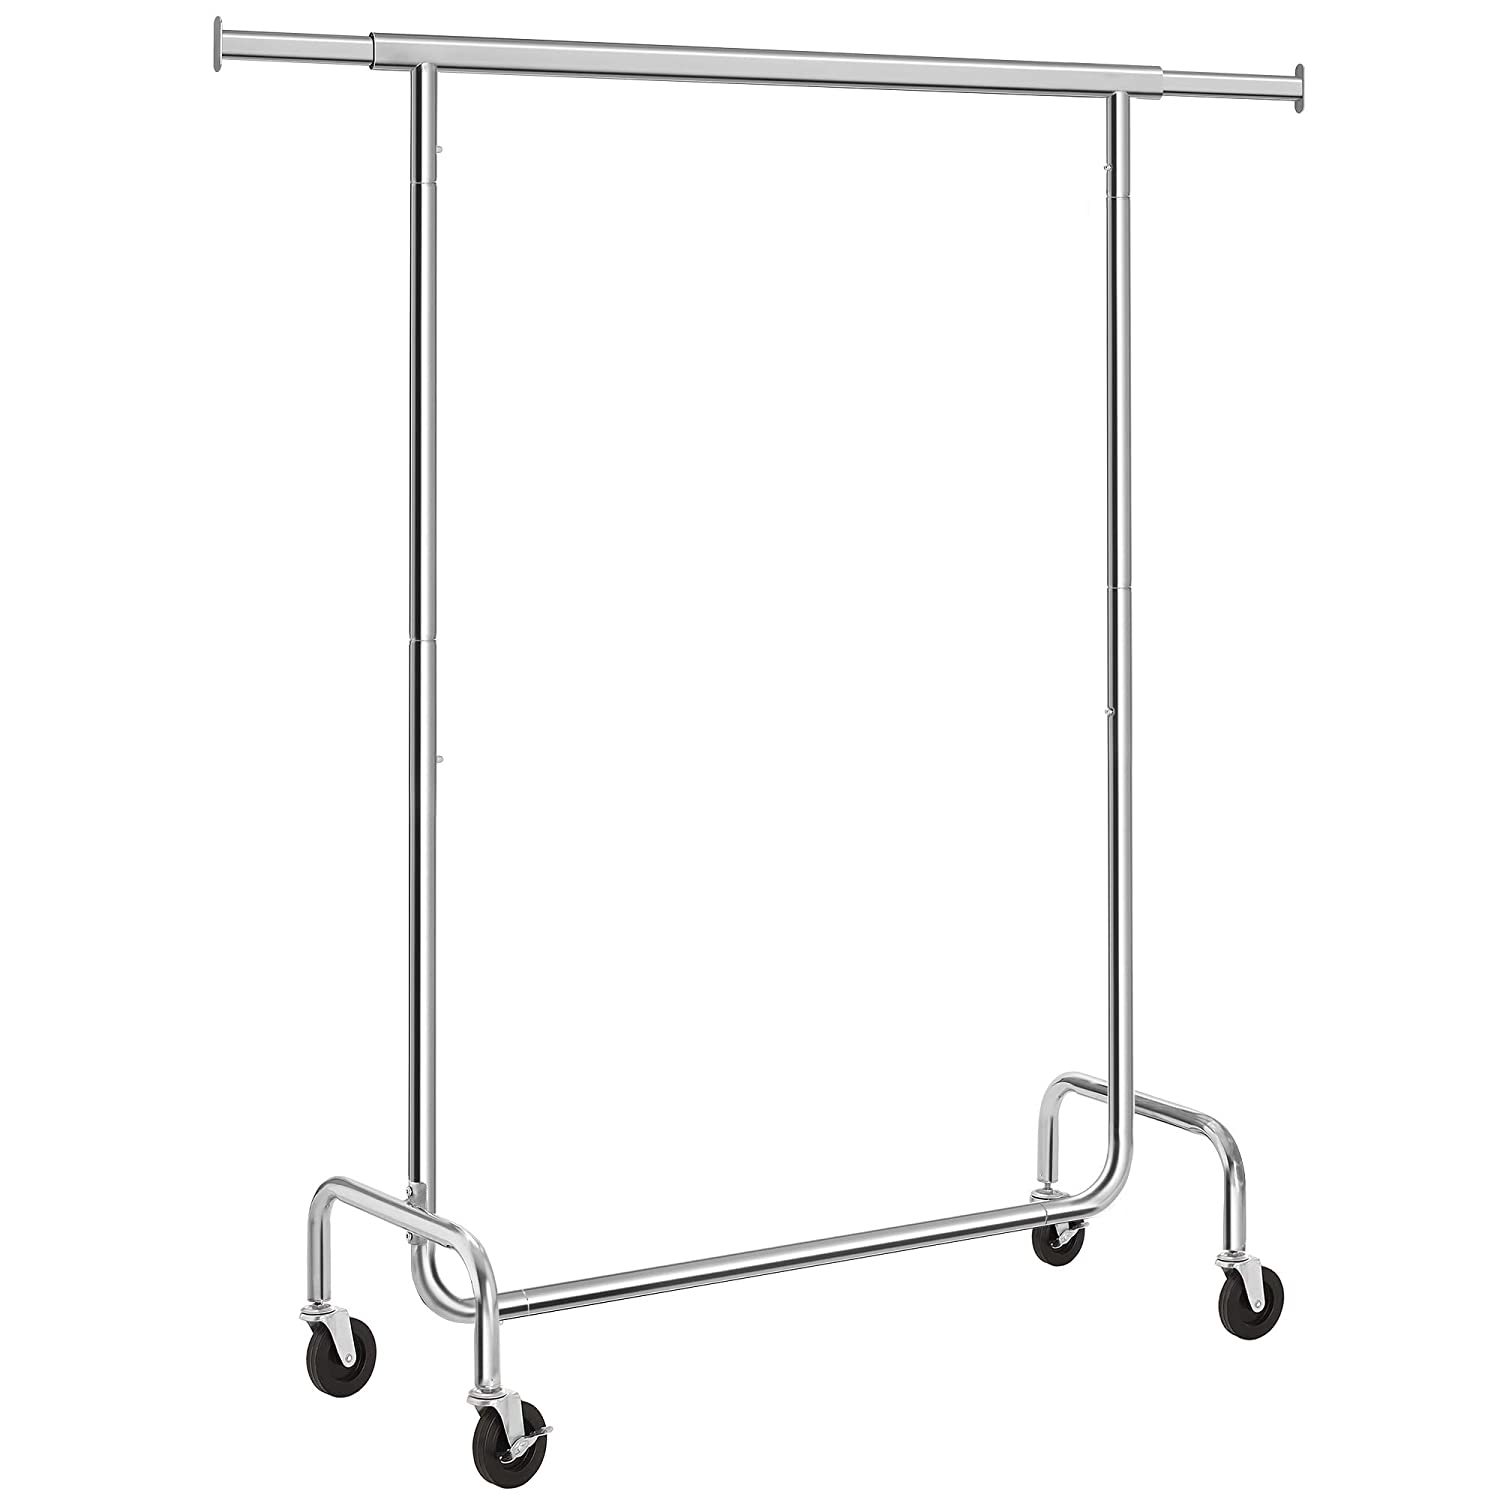 Primary image for Clothes Garment Rack Heavy Duty Maximum Capacity 300 Lb Clothing Rack On Wheels 